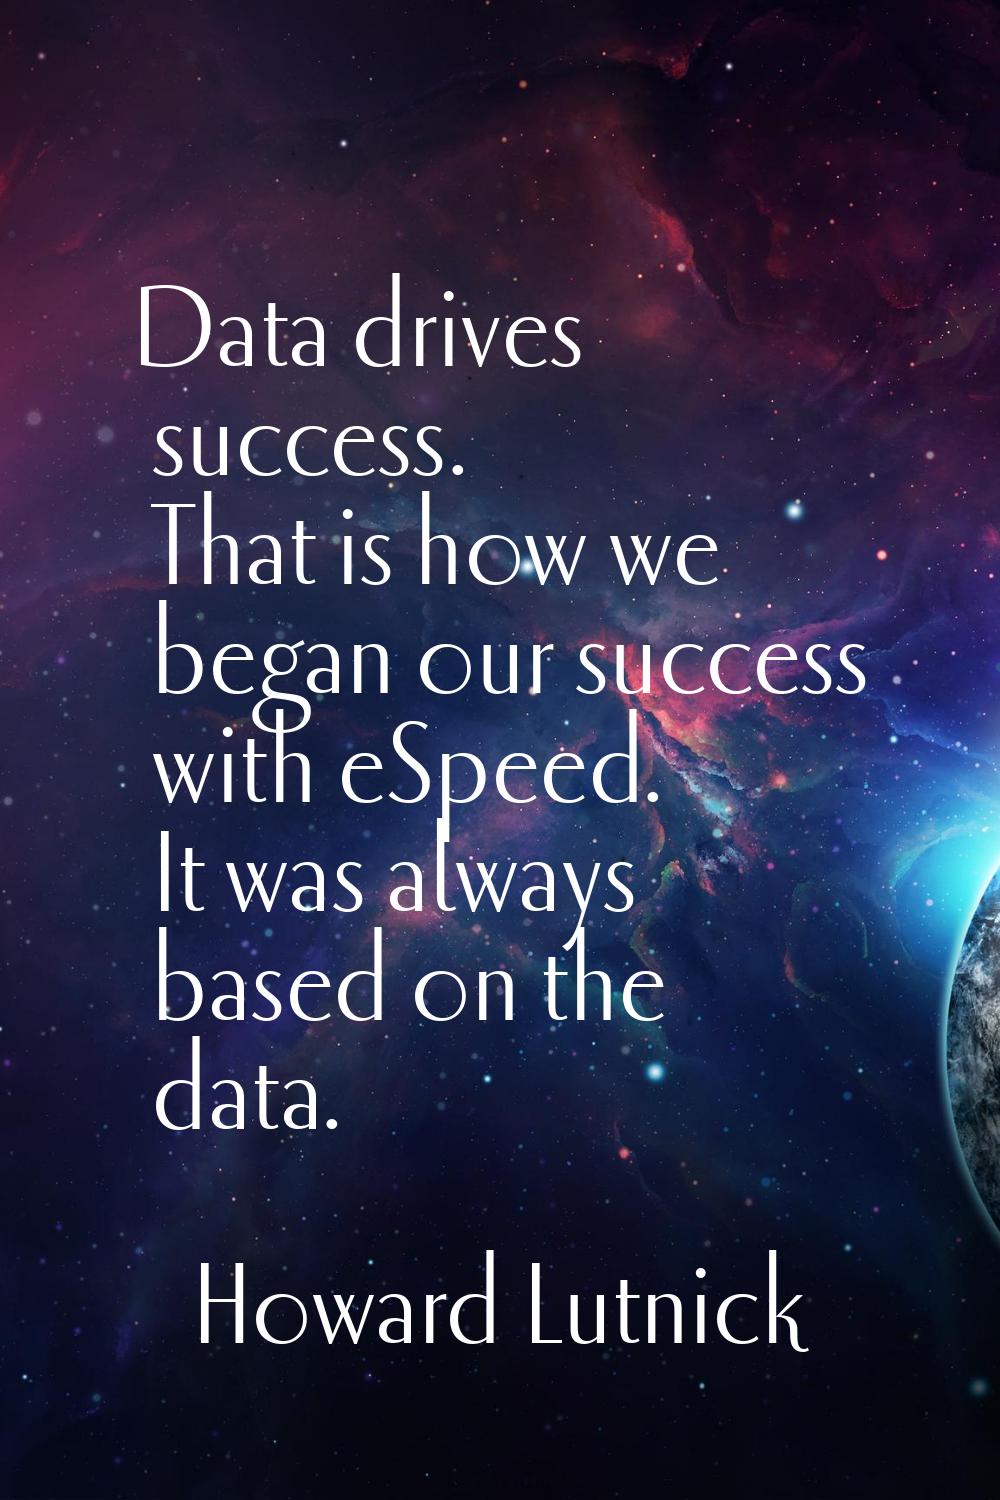 Data drives success. That is how we began our success with eSpeed. It was always based on the data.